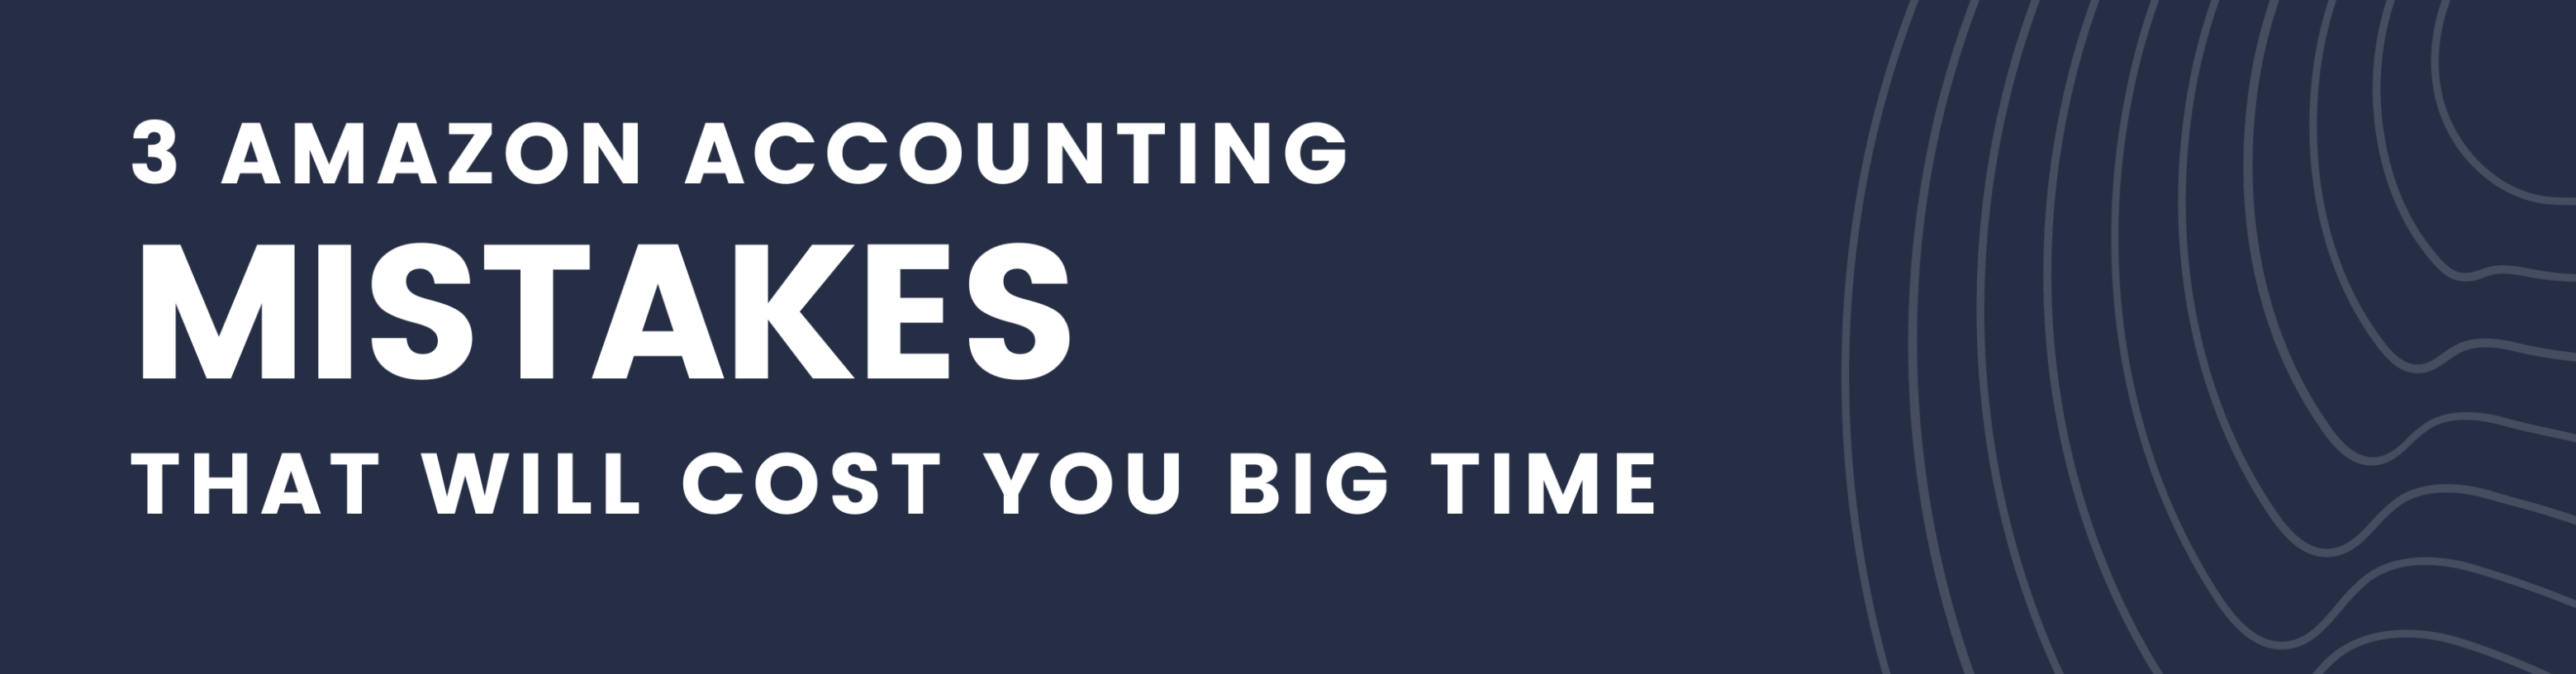 Amazon Accounting Mistakes that will Cost you Big Time